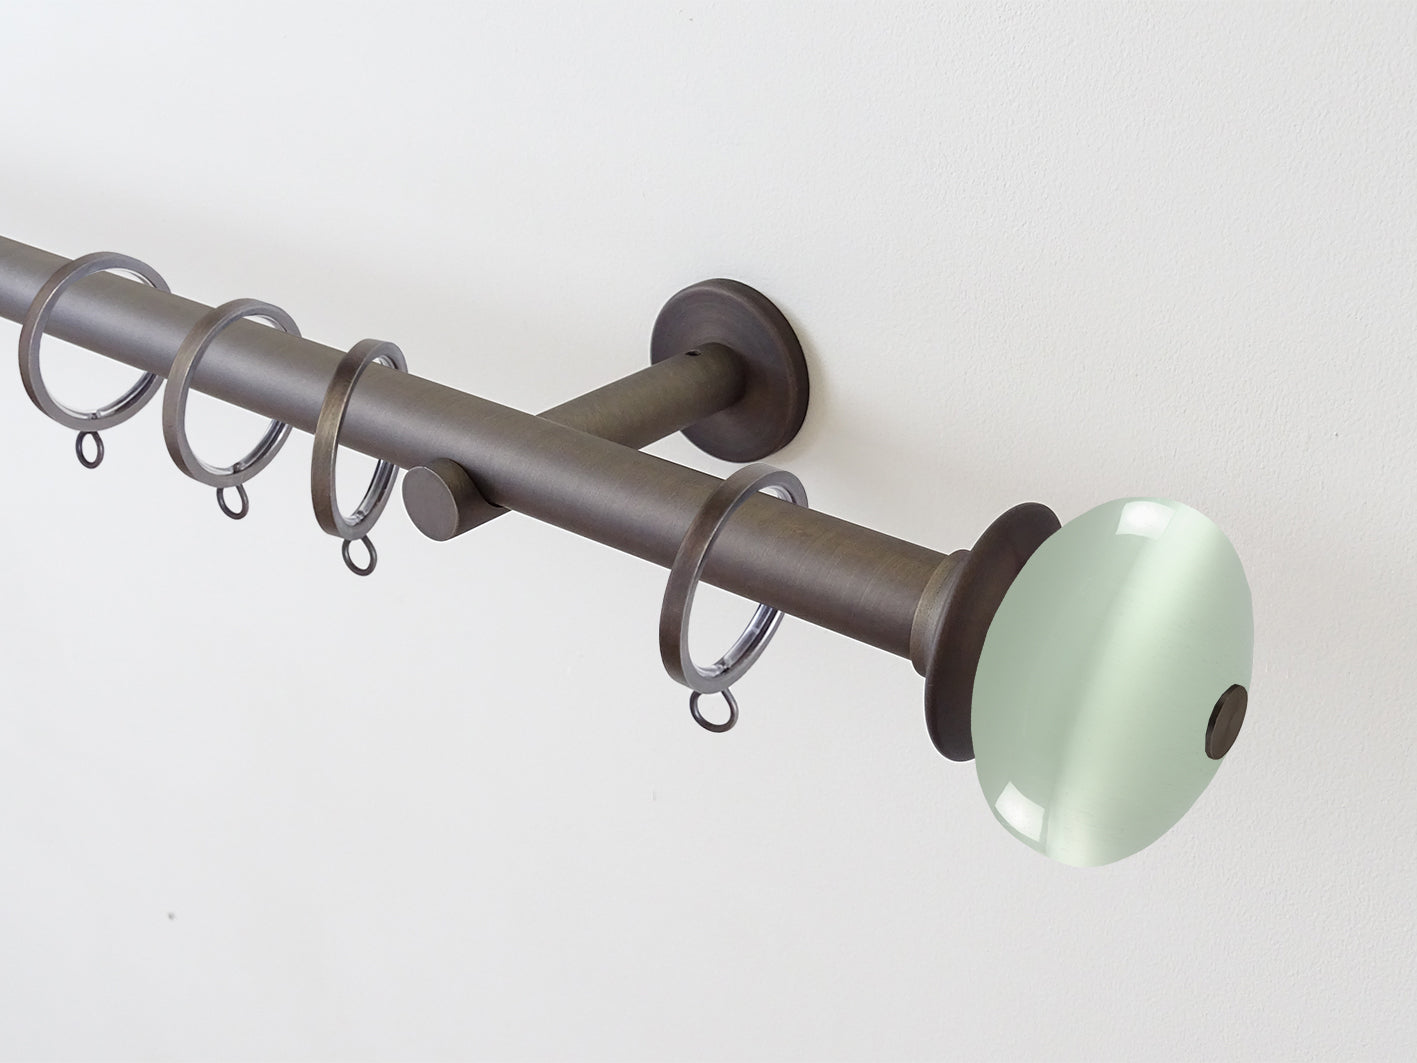 19mm dia. brushed bronze metal curtain pole set with glass moonstone finials